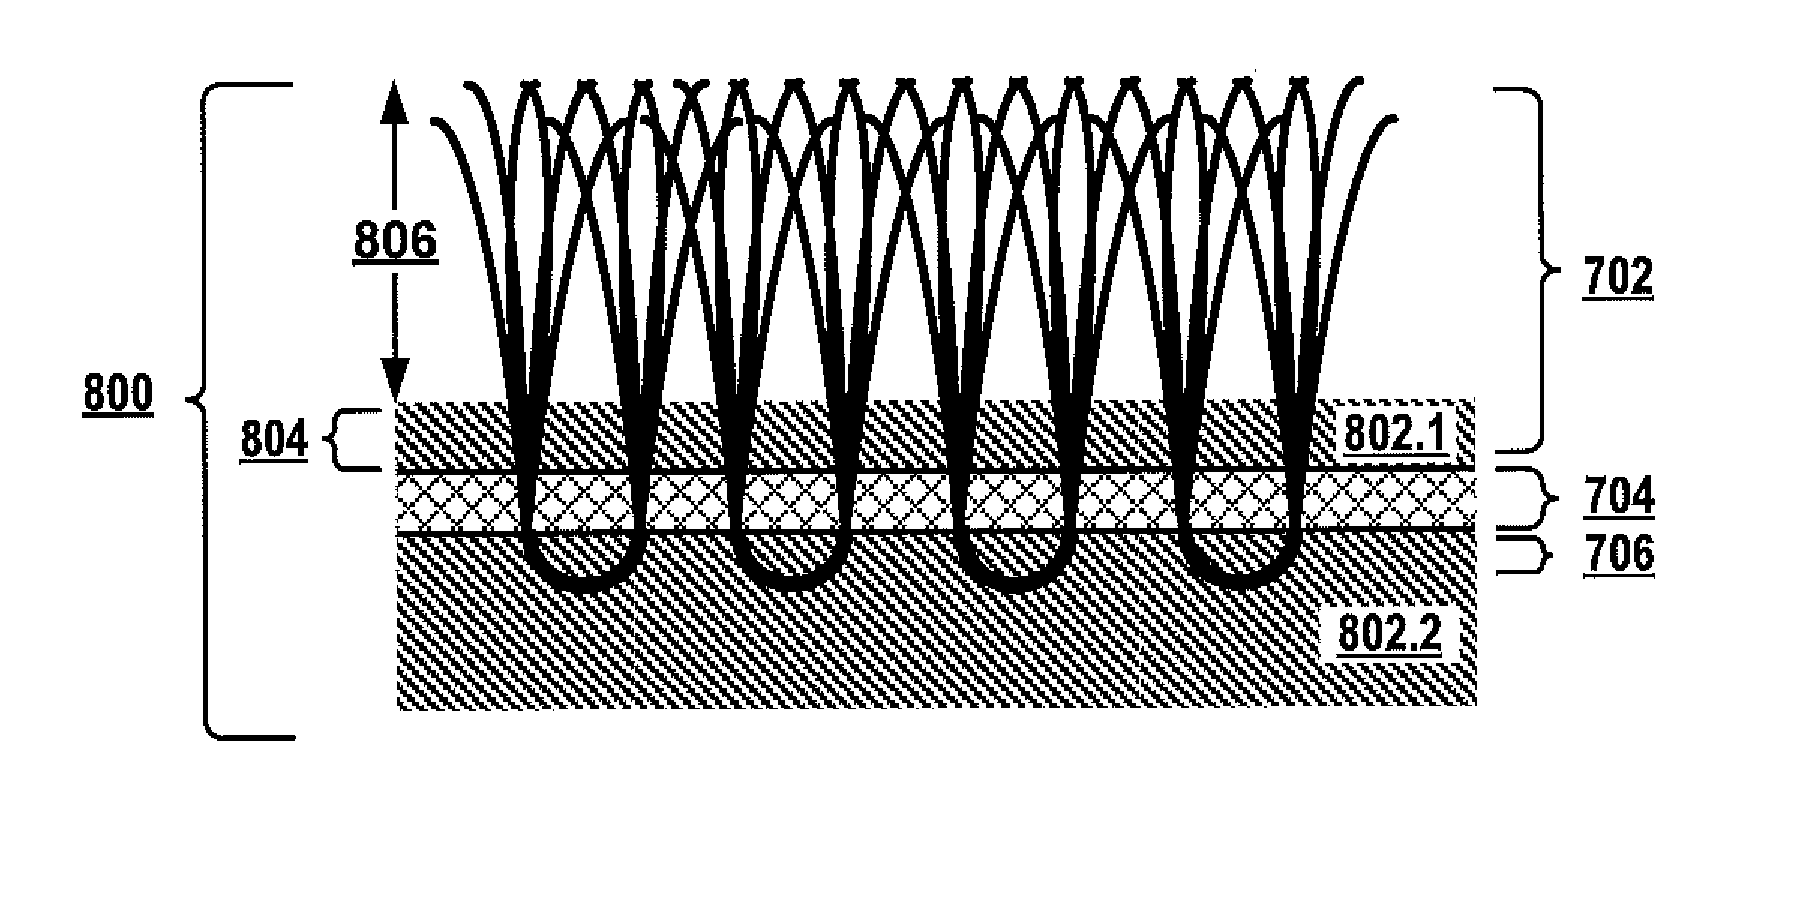 Artificial turf production using a nucleating agent